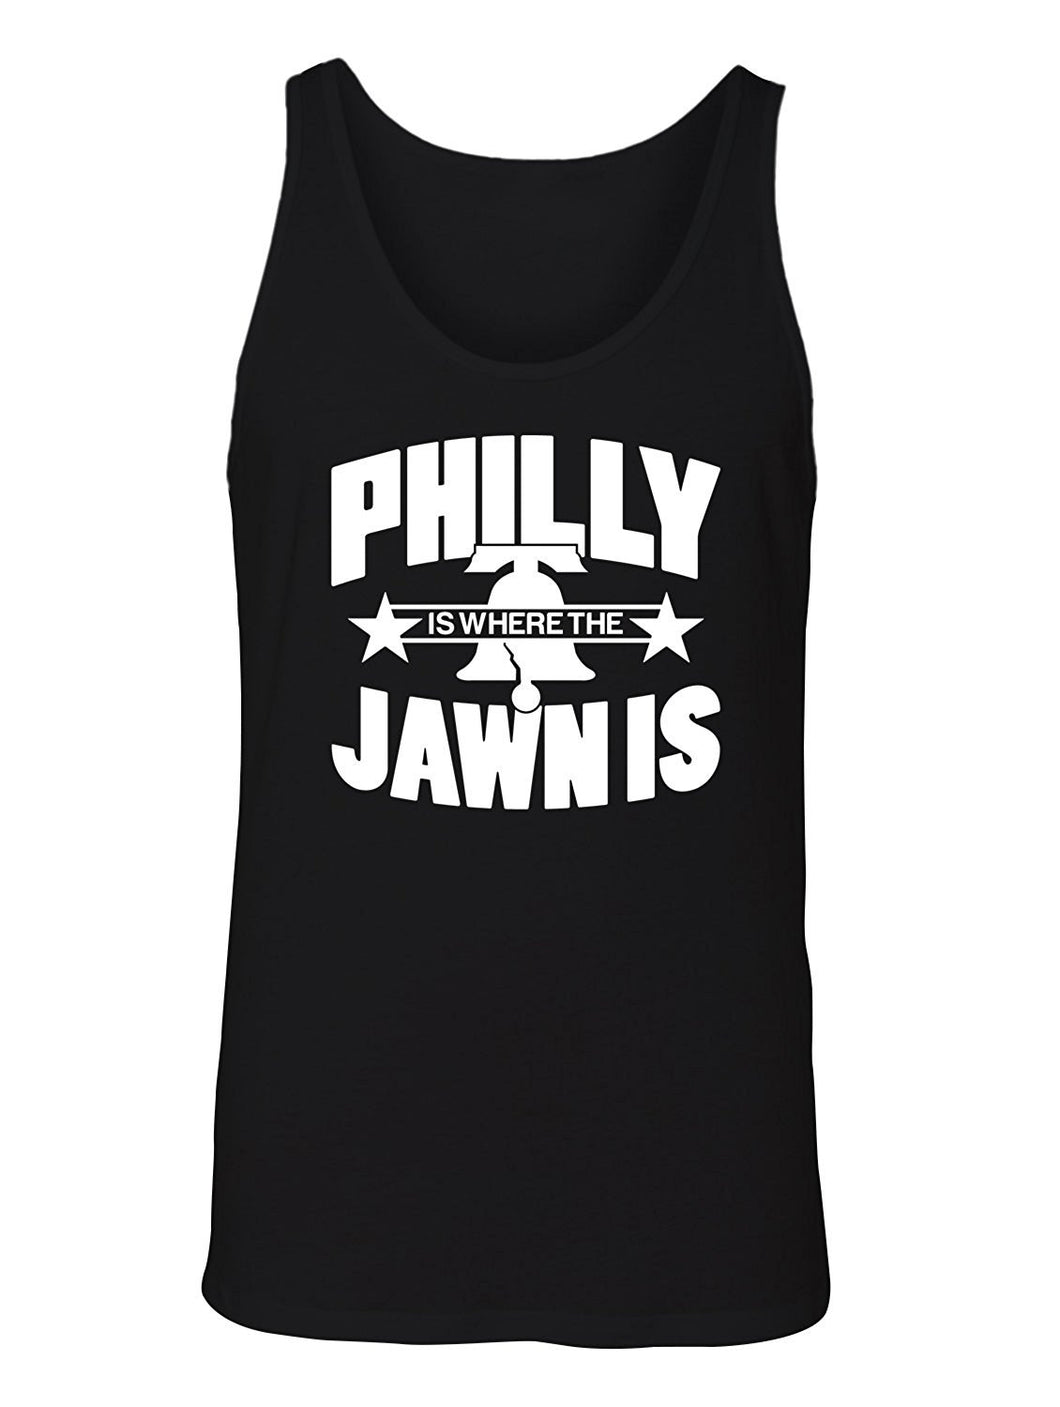 Manateez Men's Liberty Bell Philly Jawn Is Tank Top